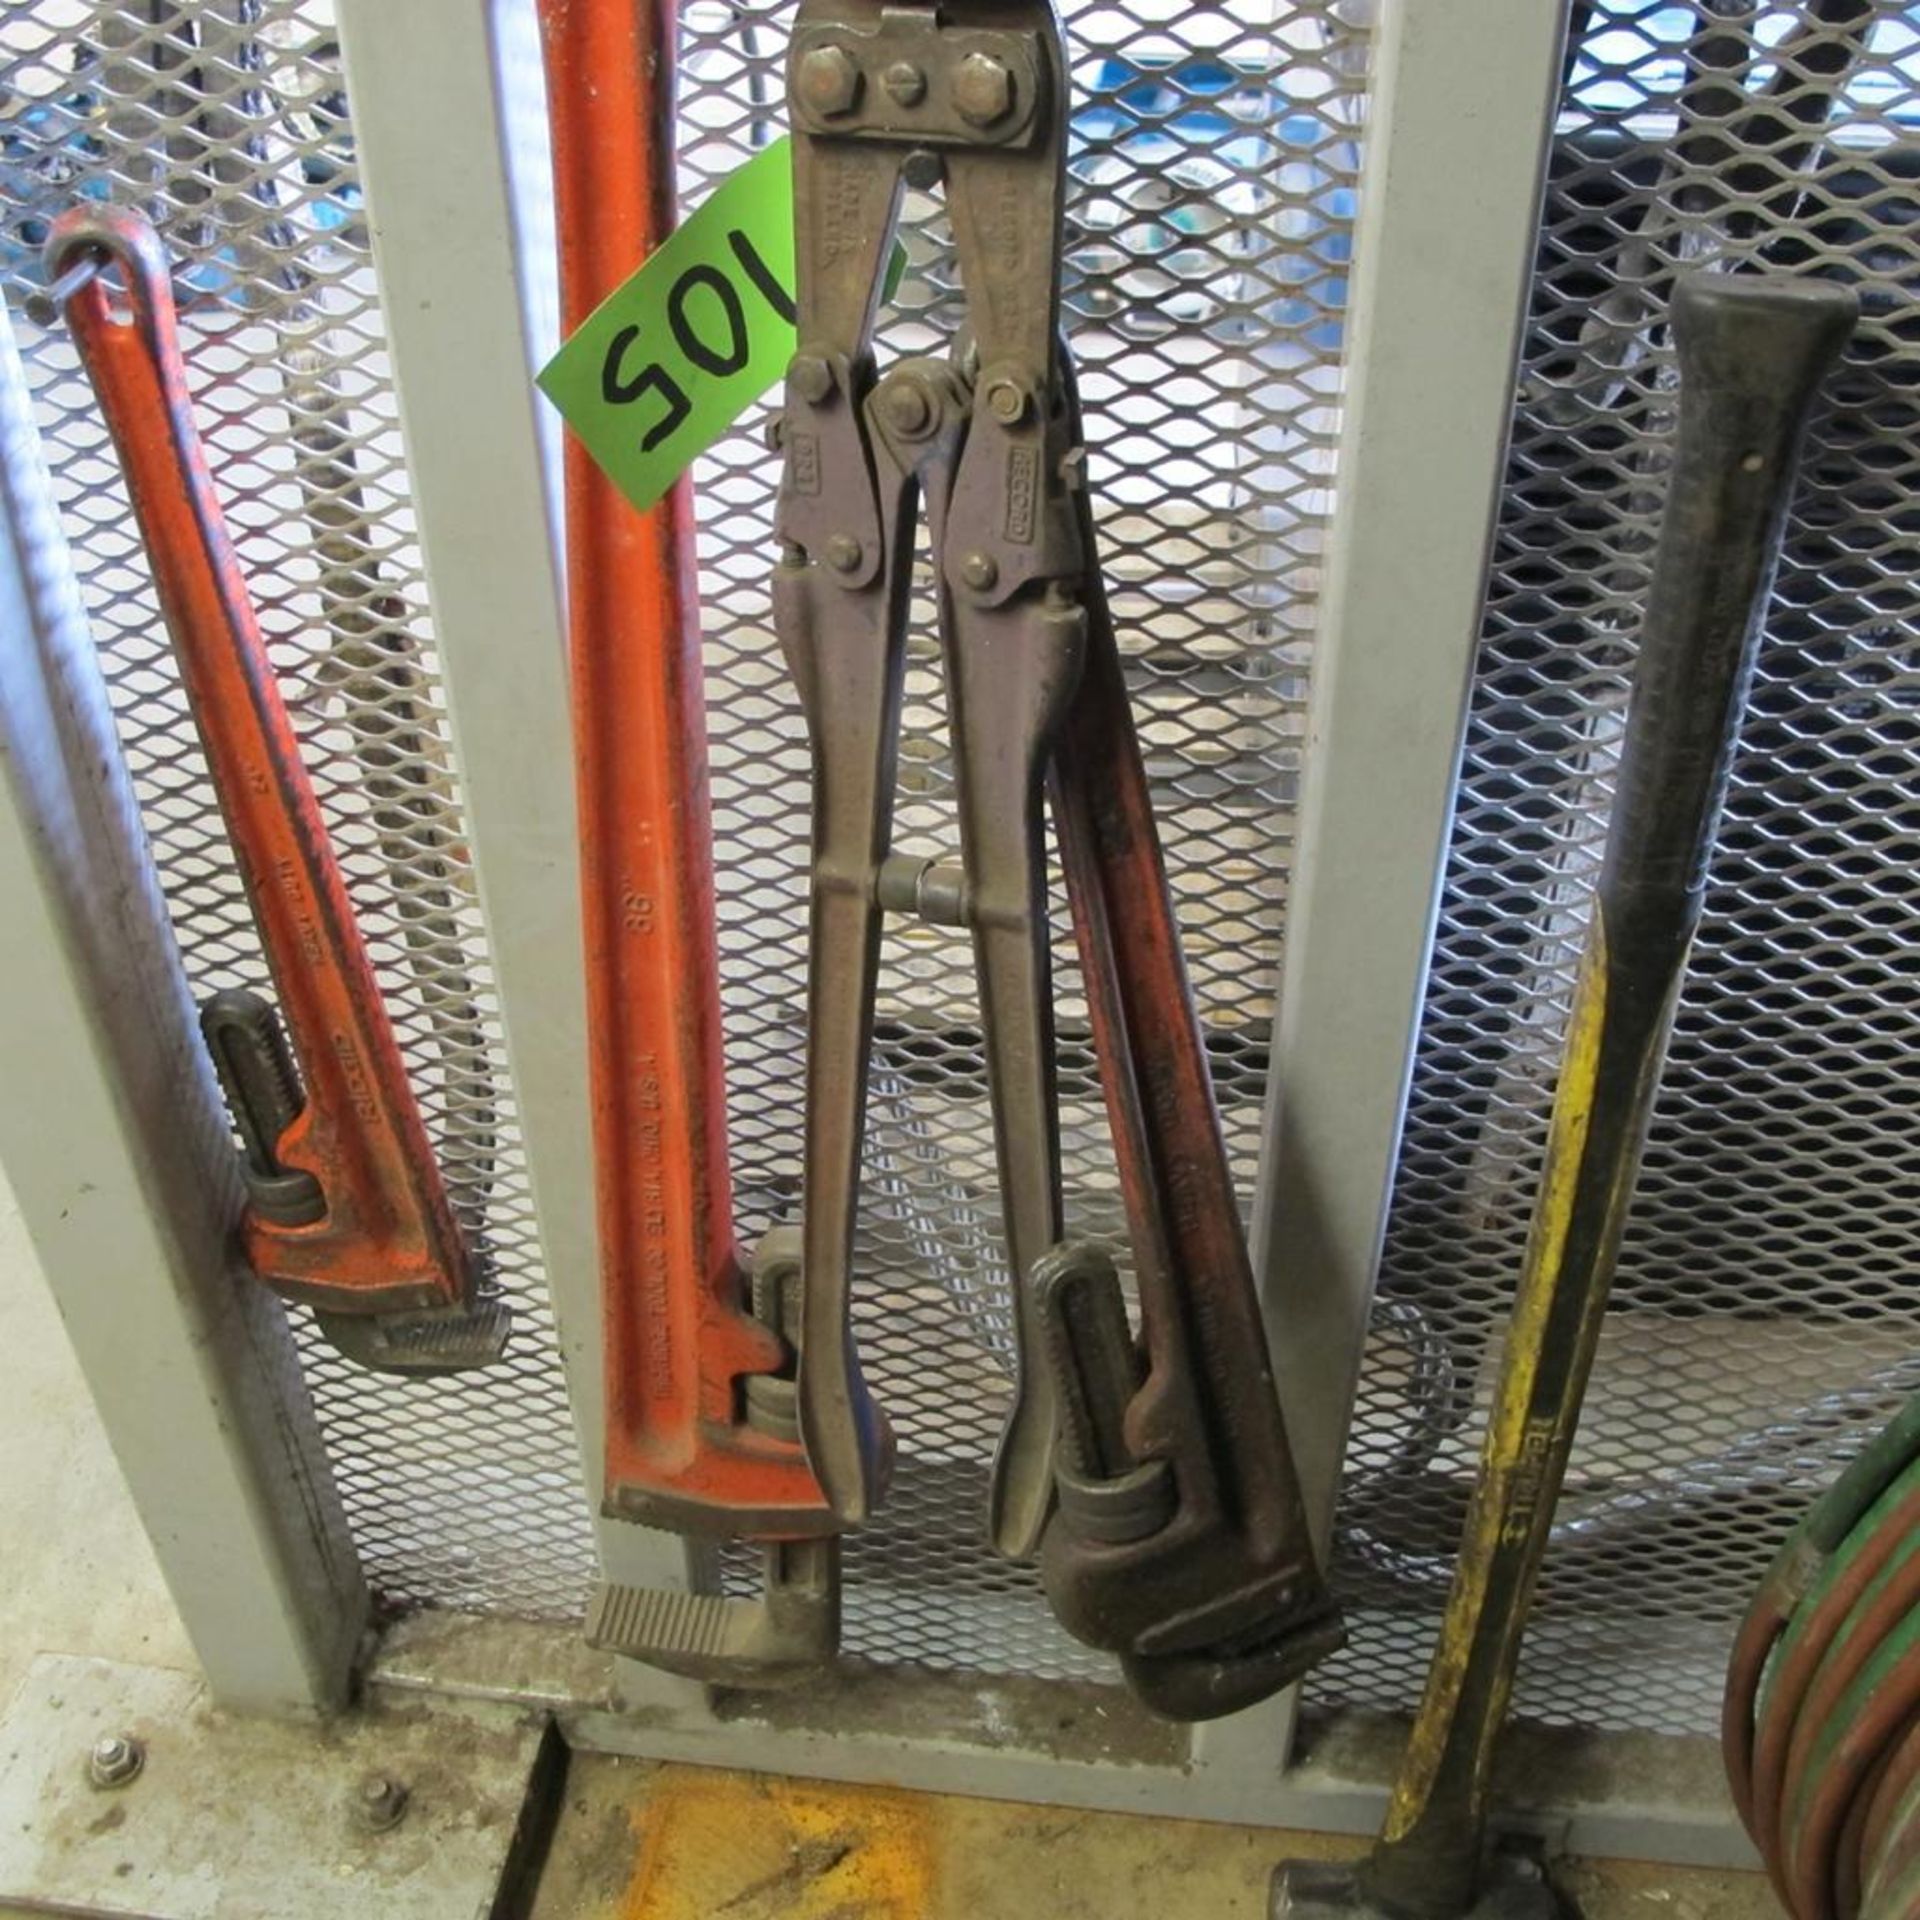 LOT OF 6 PIPE WRENCHES (1 ADJUSTABLE WRENCH, 1 SLEDGE HAMMER, 1 BOLT CUTTER) (IN WEST BLDG) - Image 3 of 3